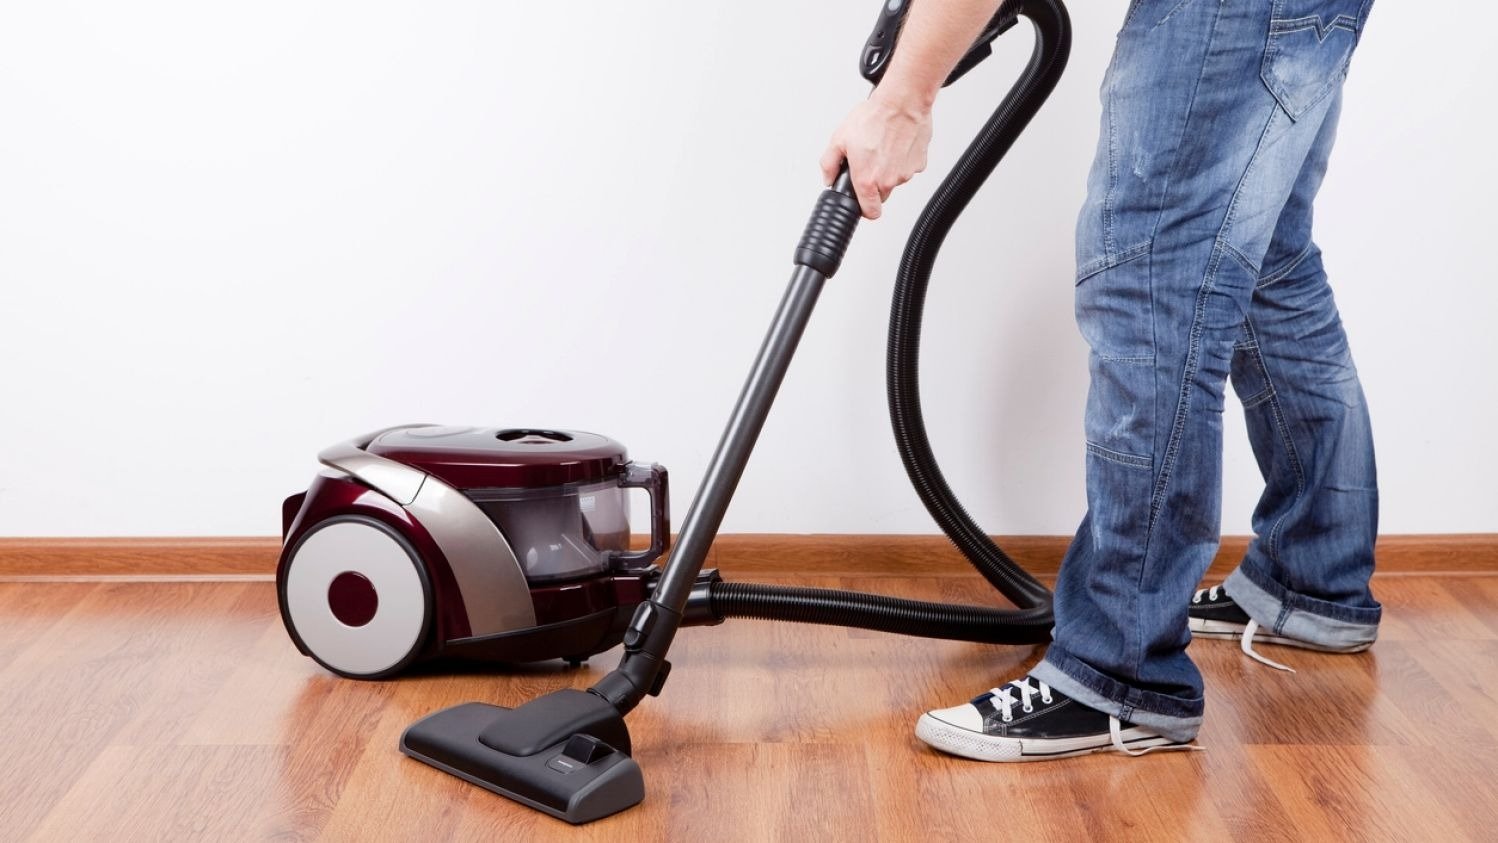 Why My Vacuum Cleaner is Not Picking Up